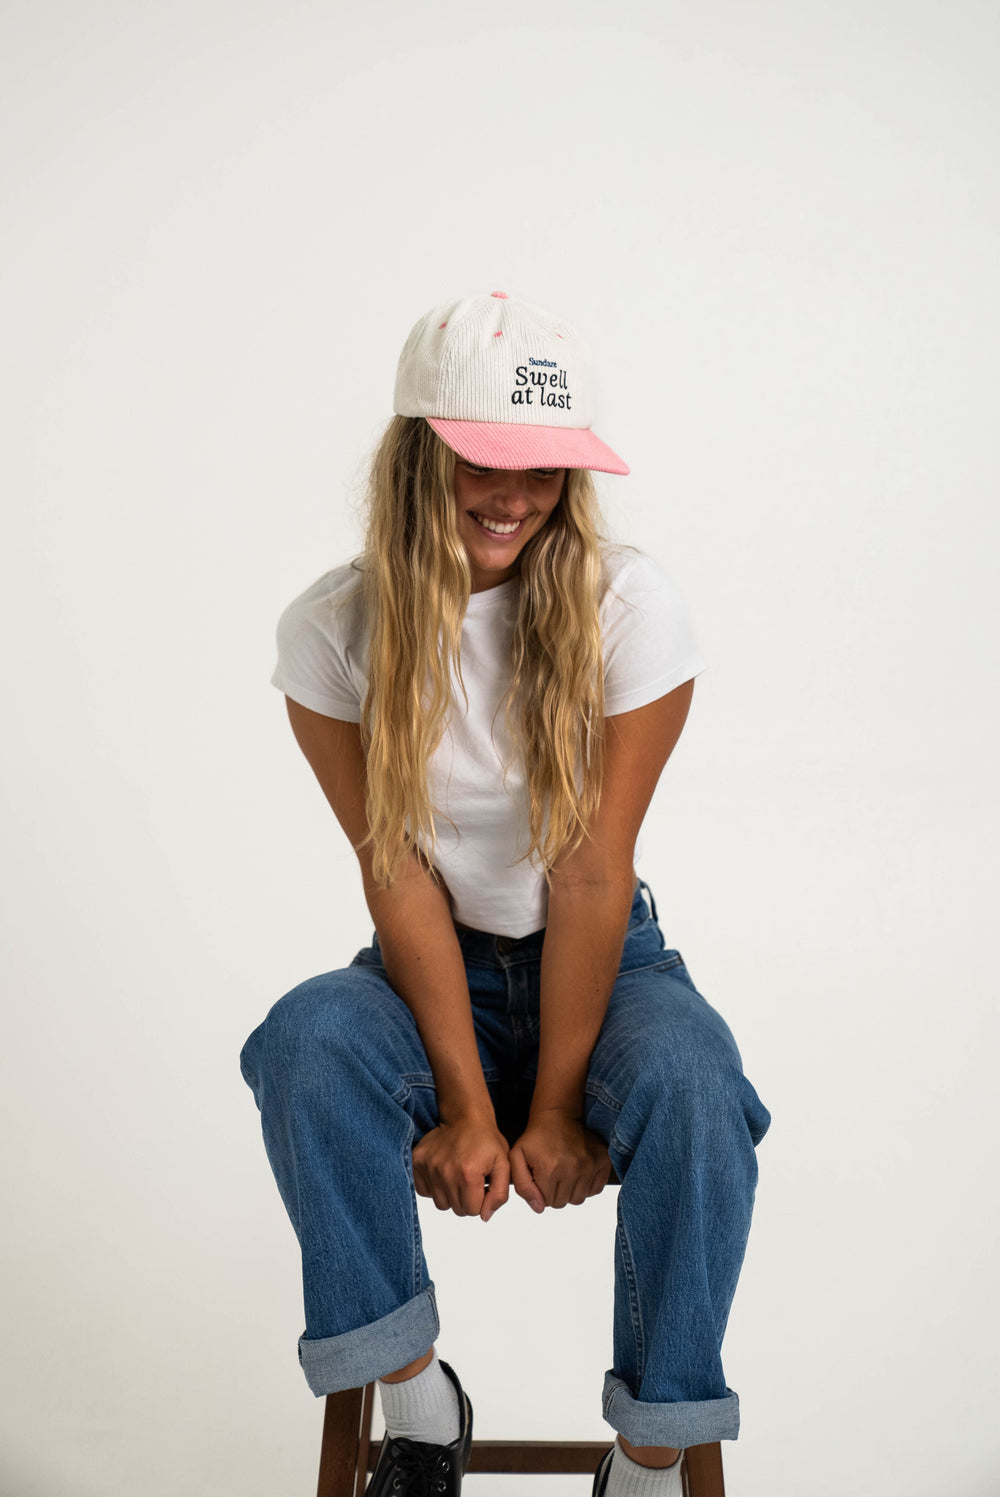 Swell at Last pink and White Corduroy Hat - 5 Panel Corduroy Snap Back